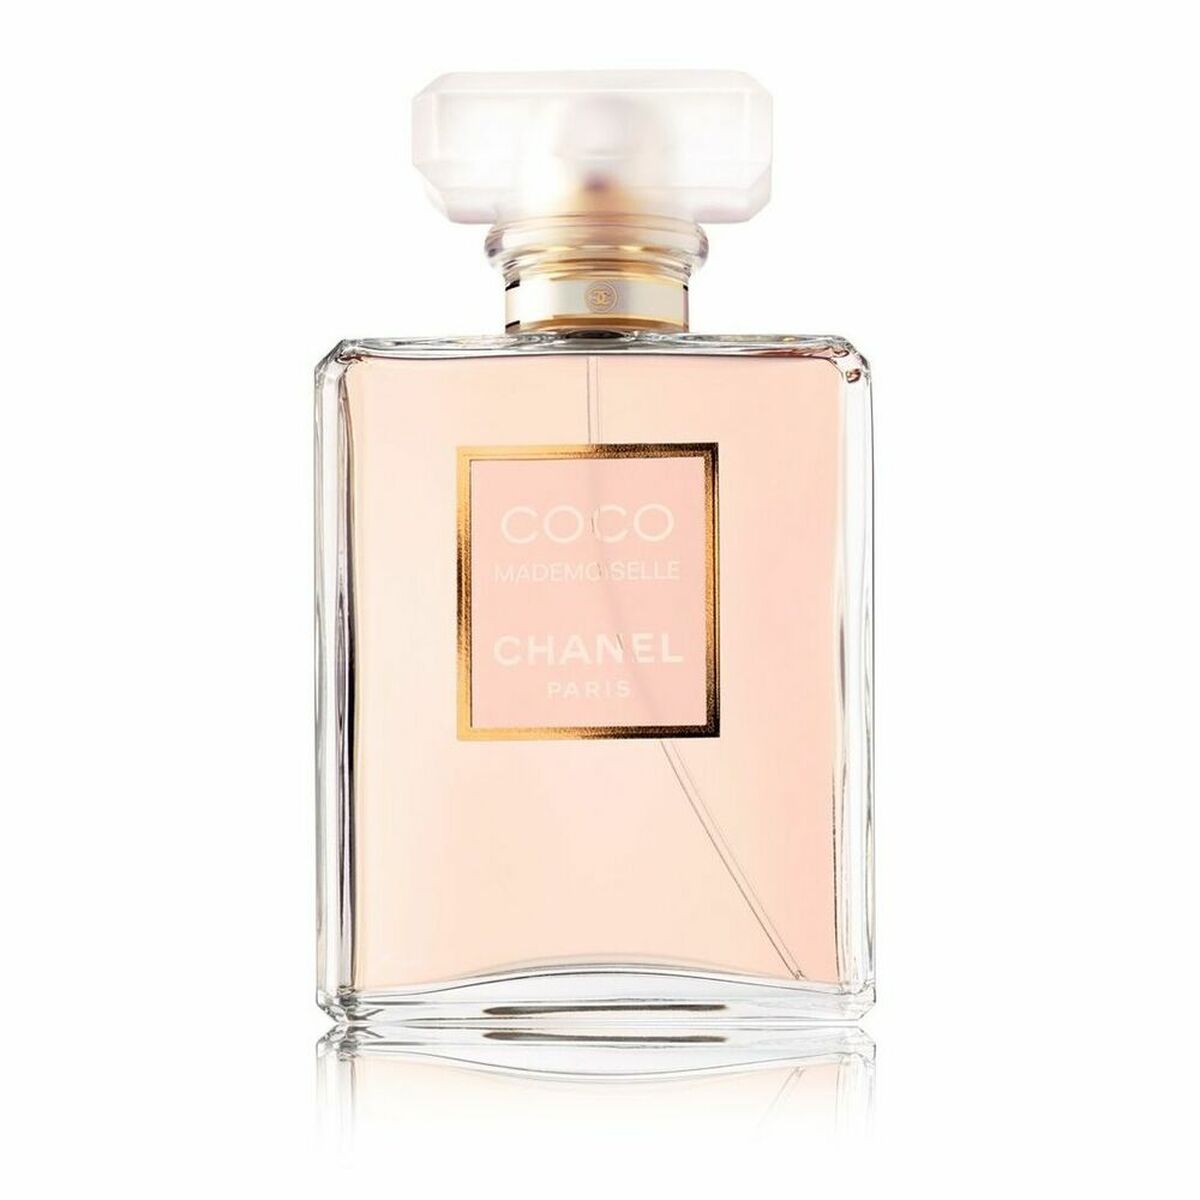 CHANEL - COCO MADEMOISELLE. Night and day. Discover on chanel.com/-CocoMademoiselle-20